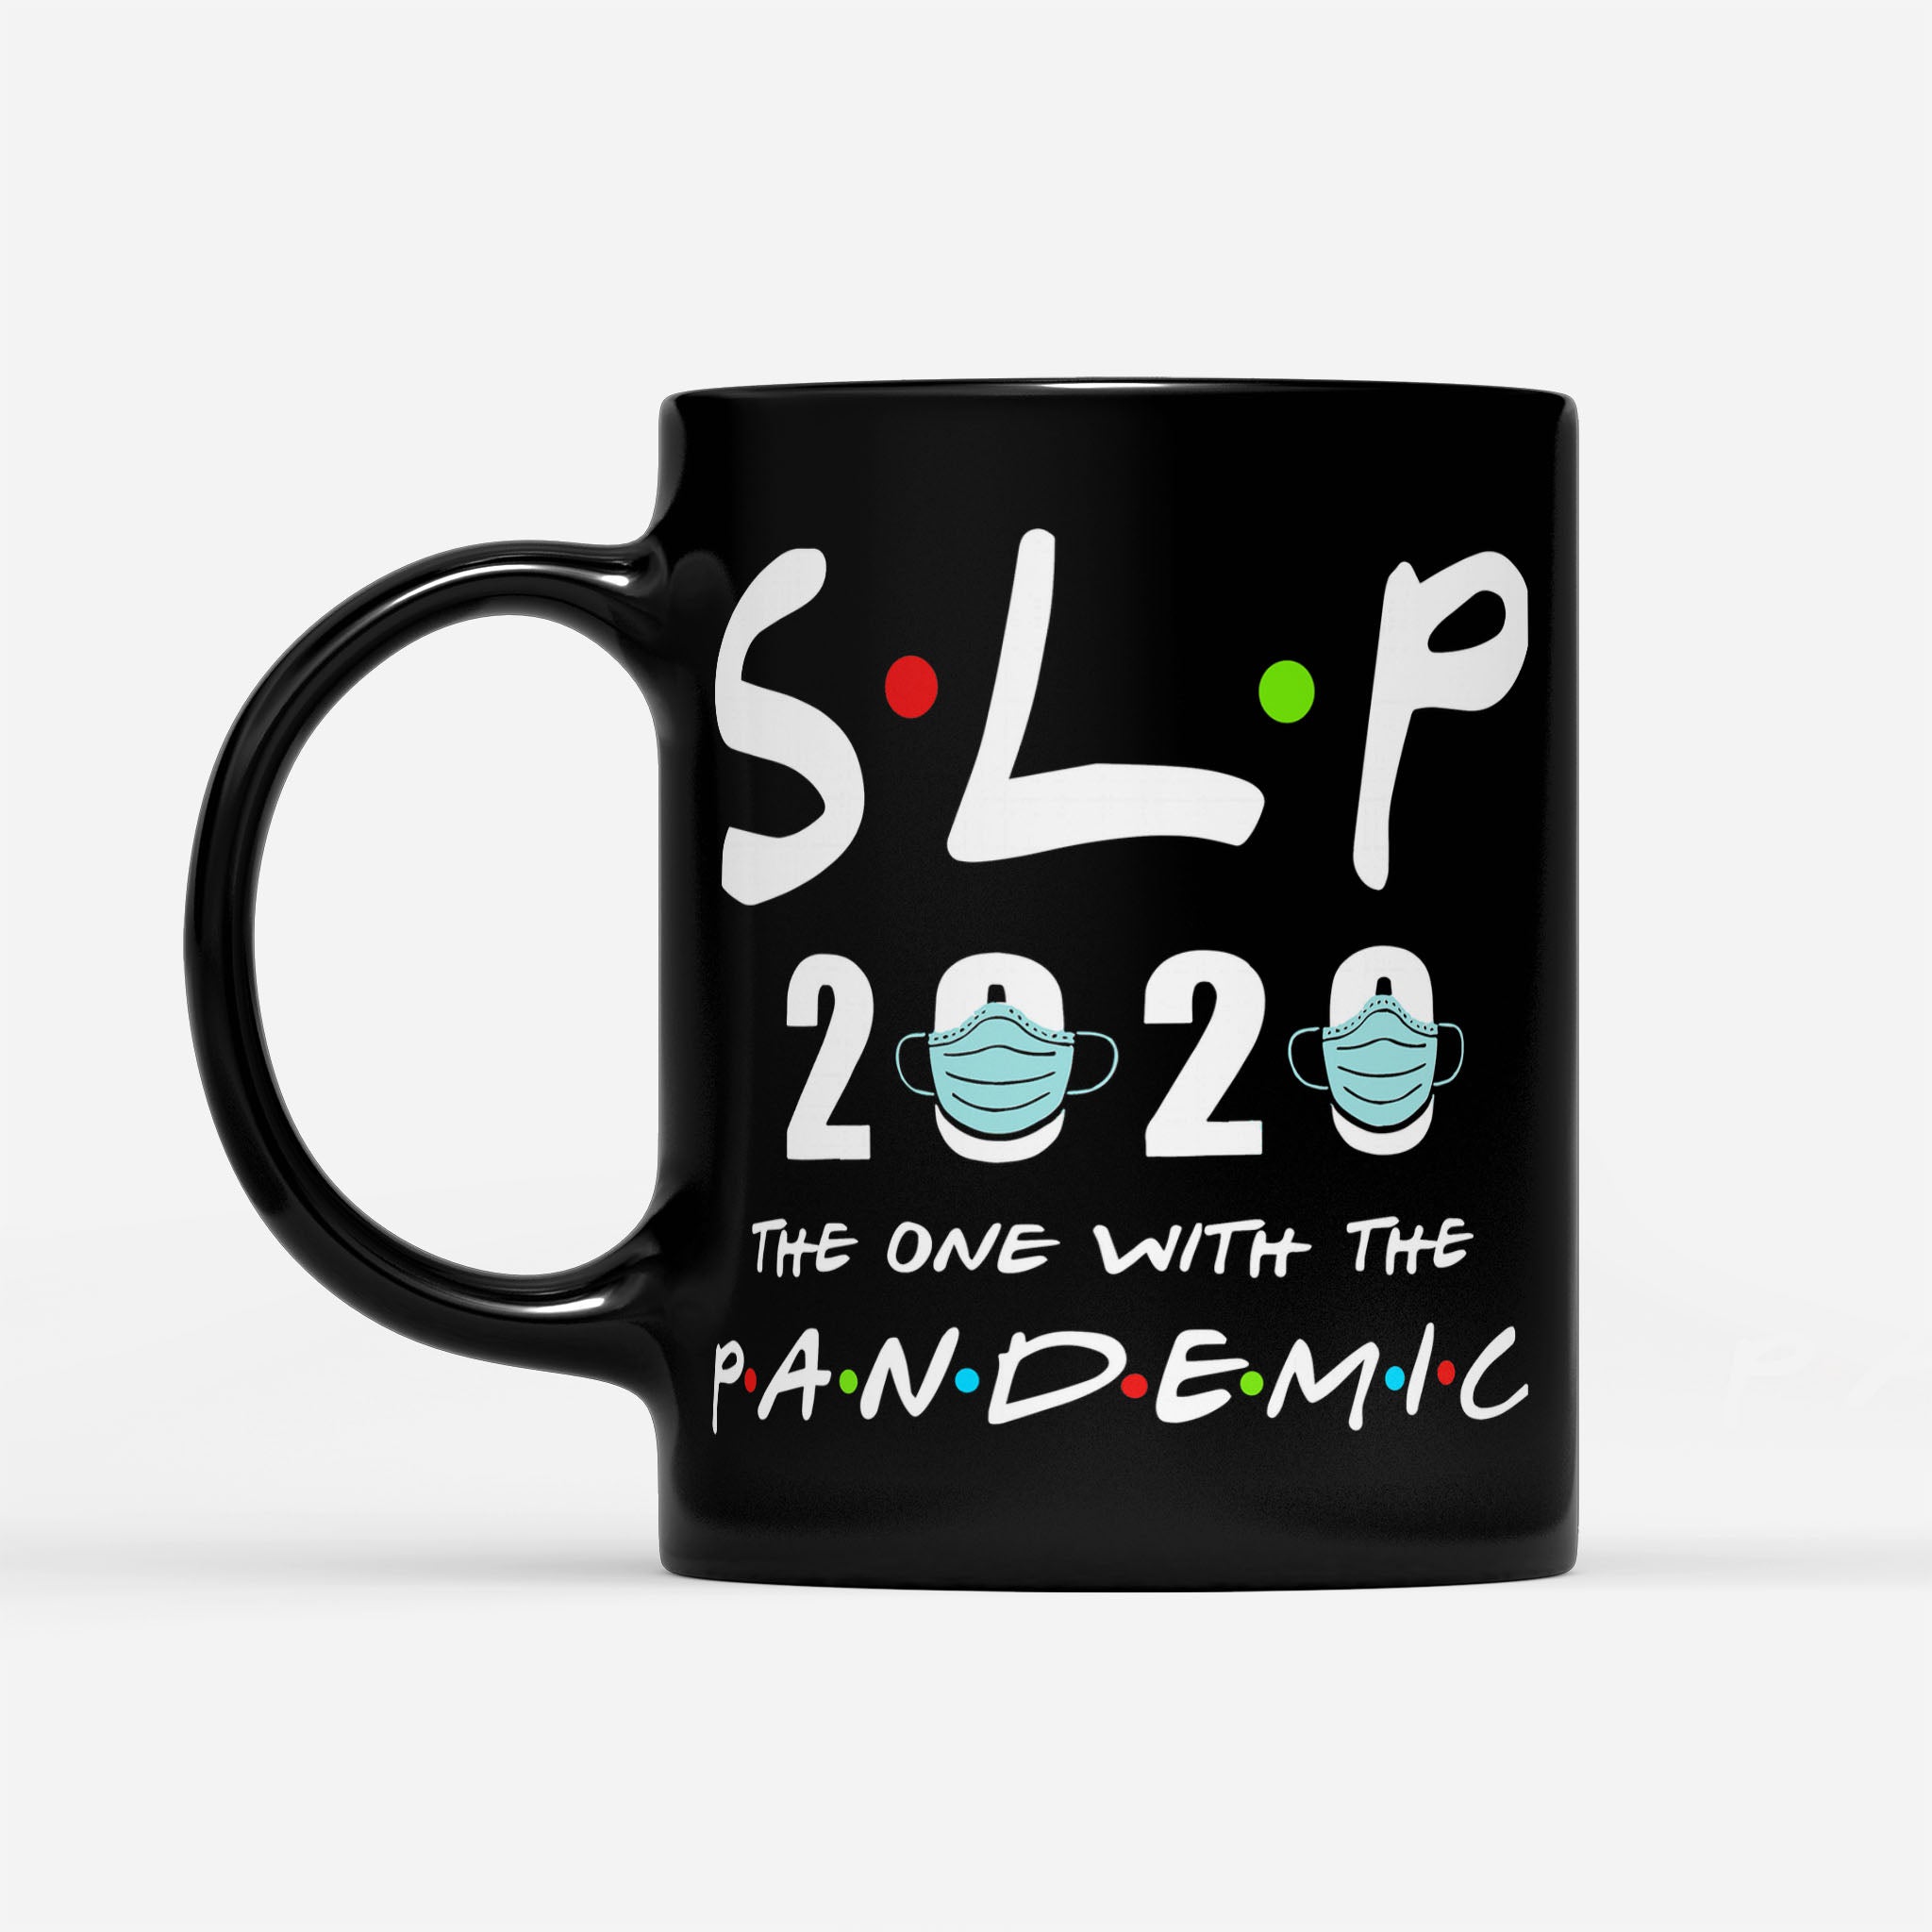 Slp 2020 The One With The Pandemic - Black Mug